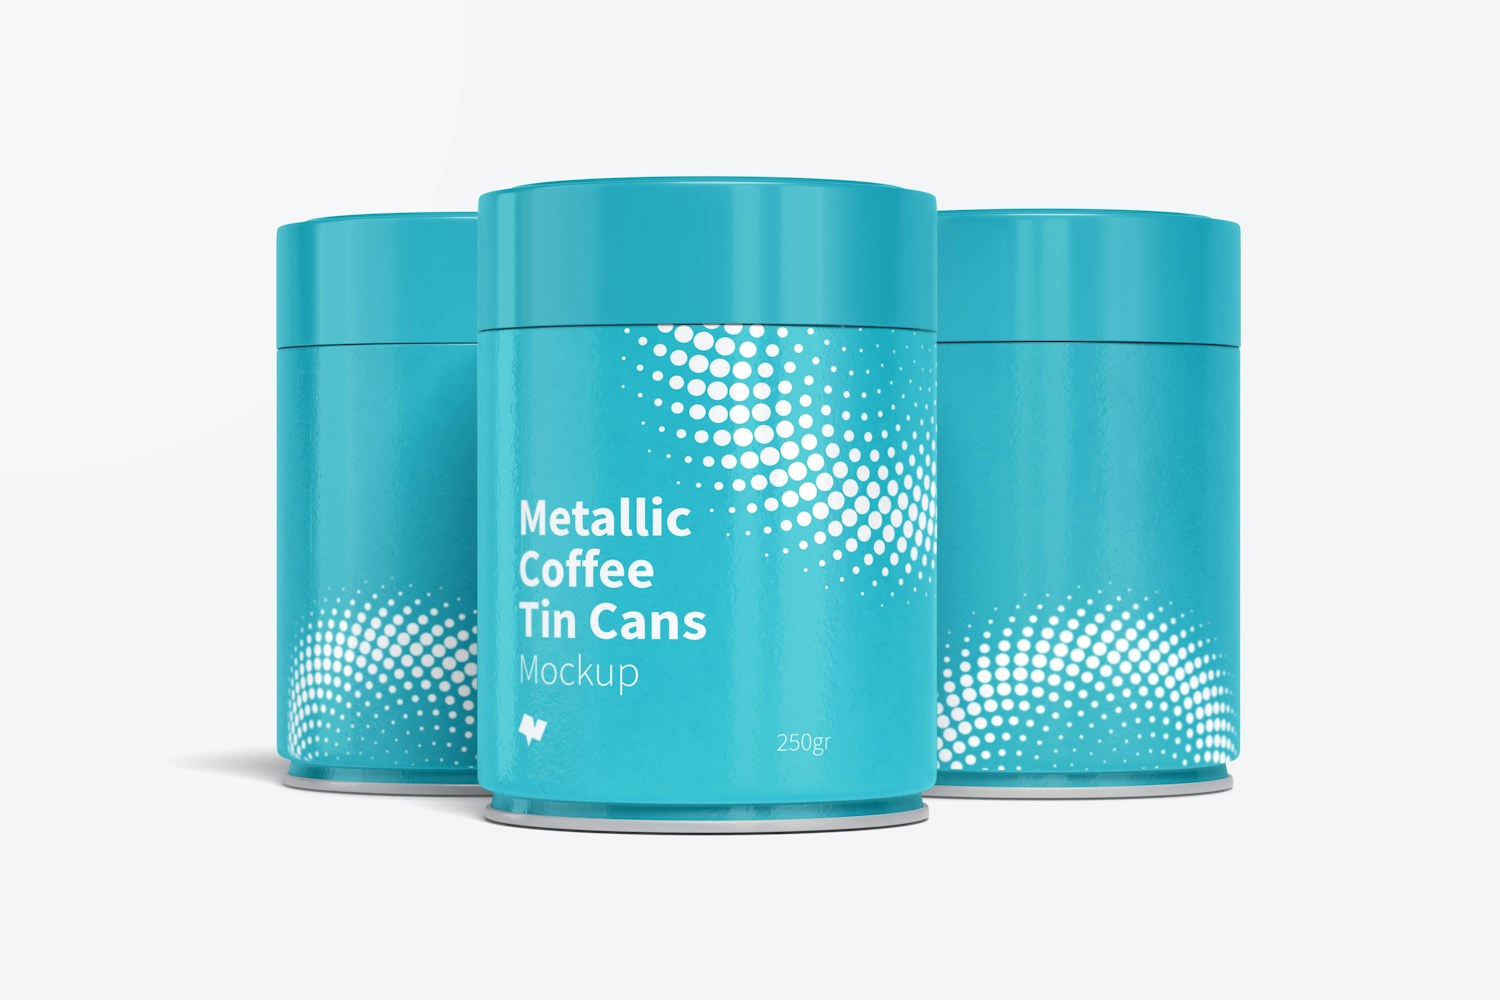 Metallic Coffee Tin Cans with Plastic Lids Mockup, Closed Set